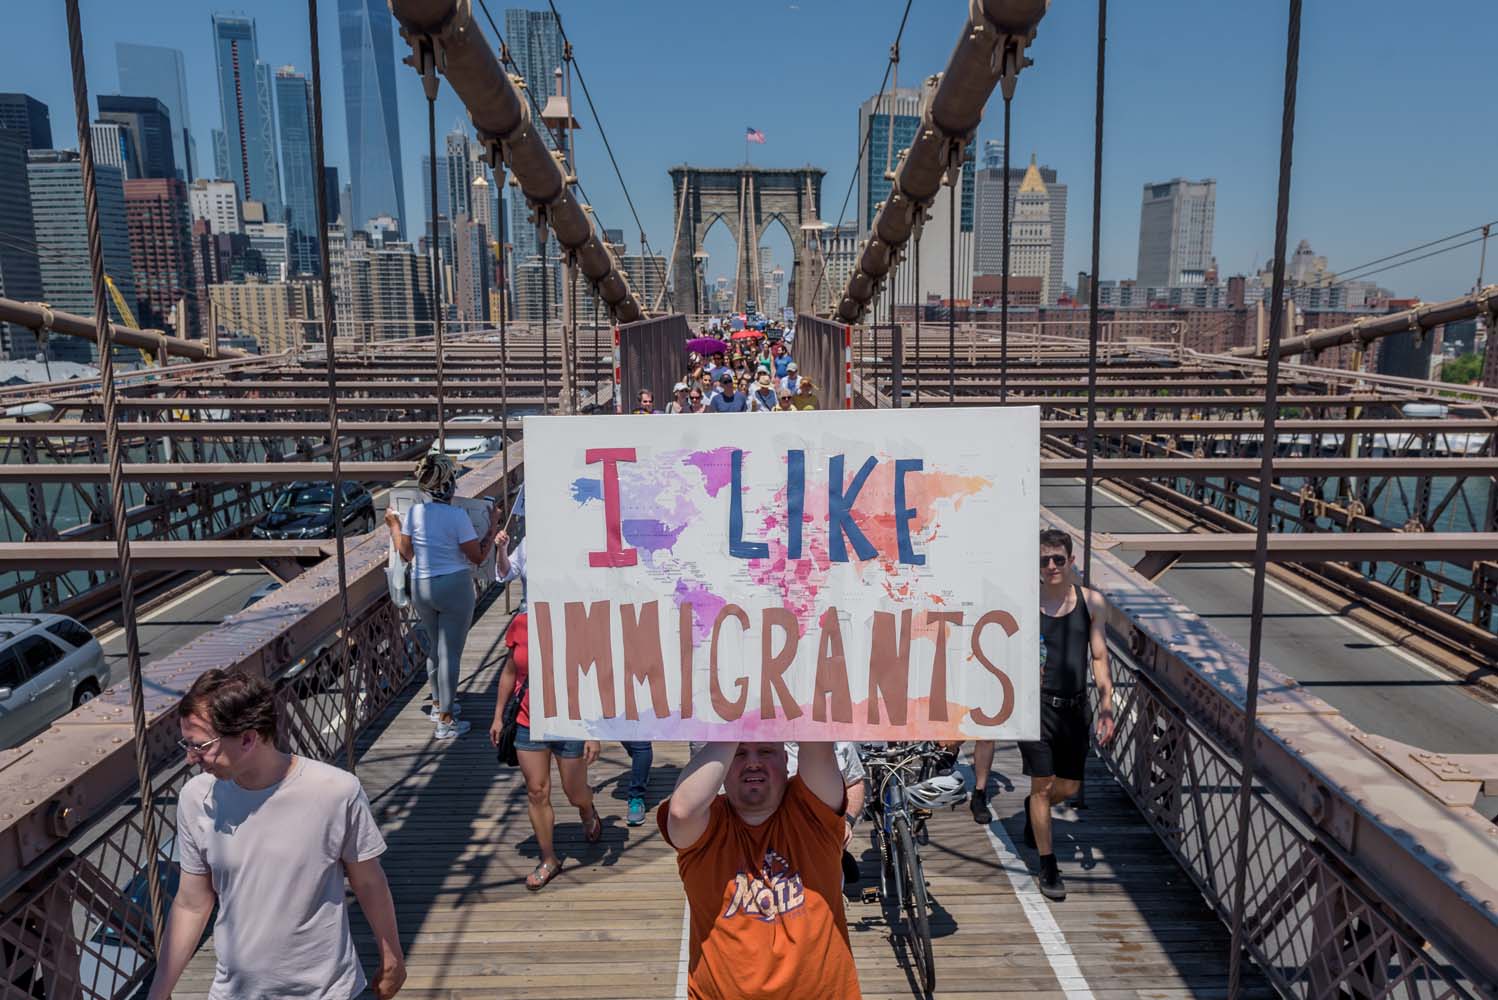 #FamiliesBelongTogether marches in US